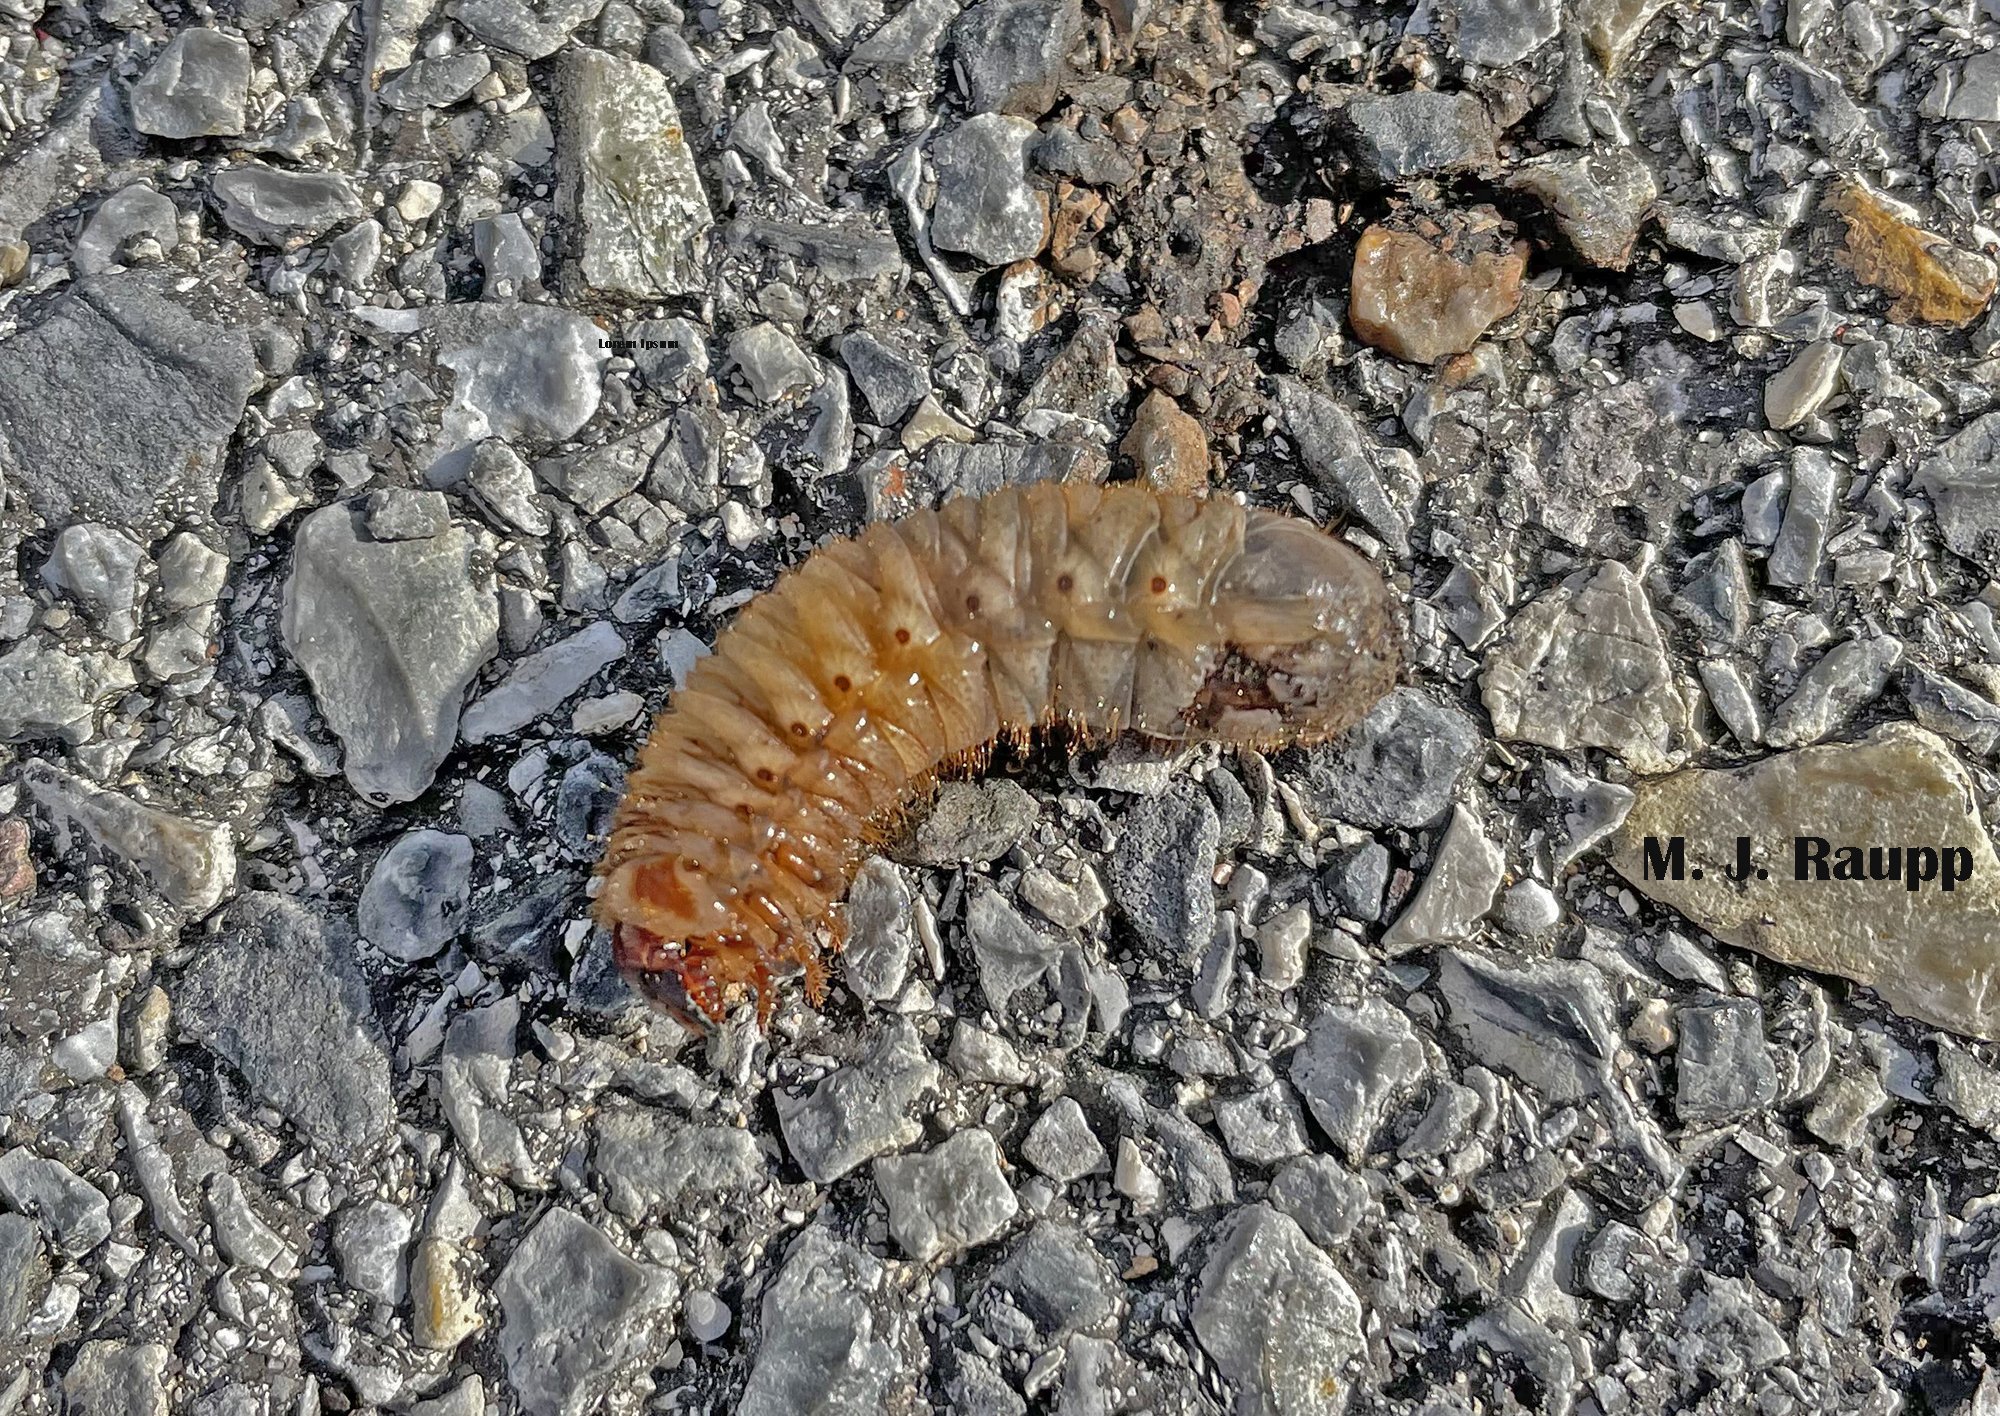 From the mailbag – Who's that large dead insect on the driveway